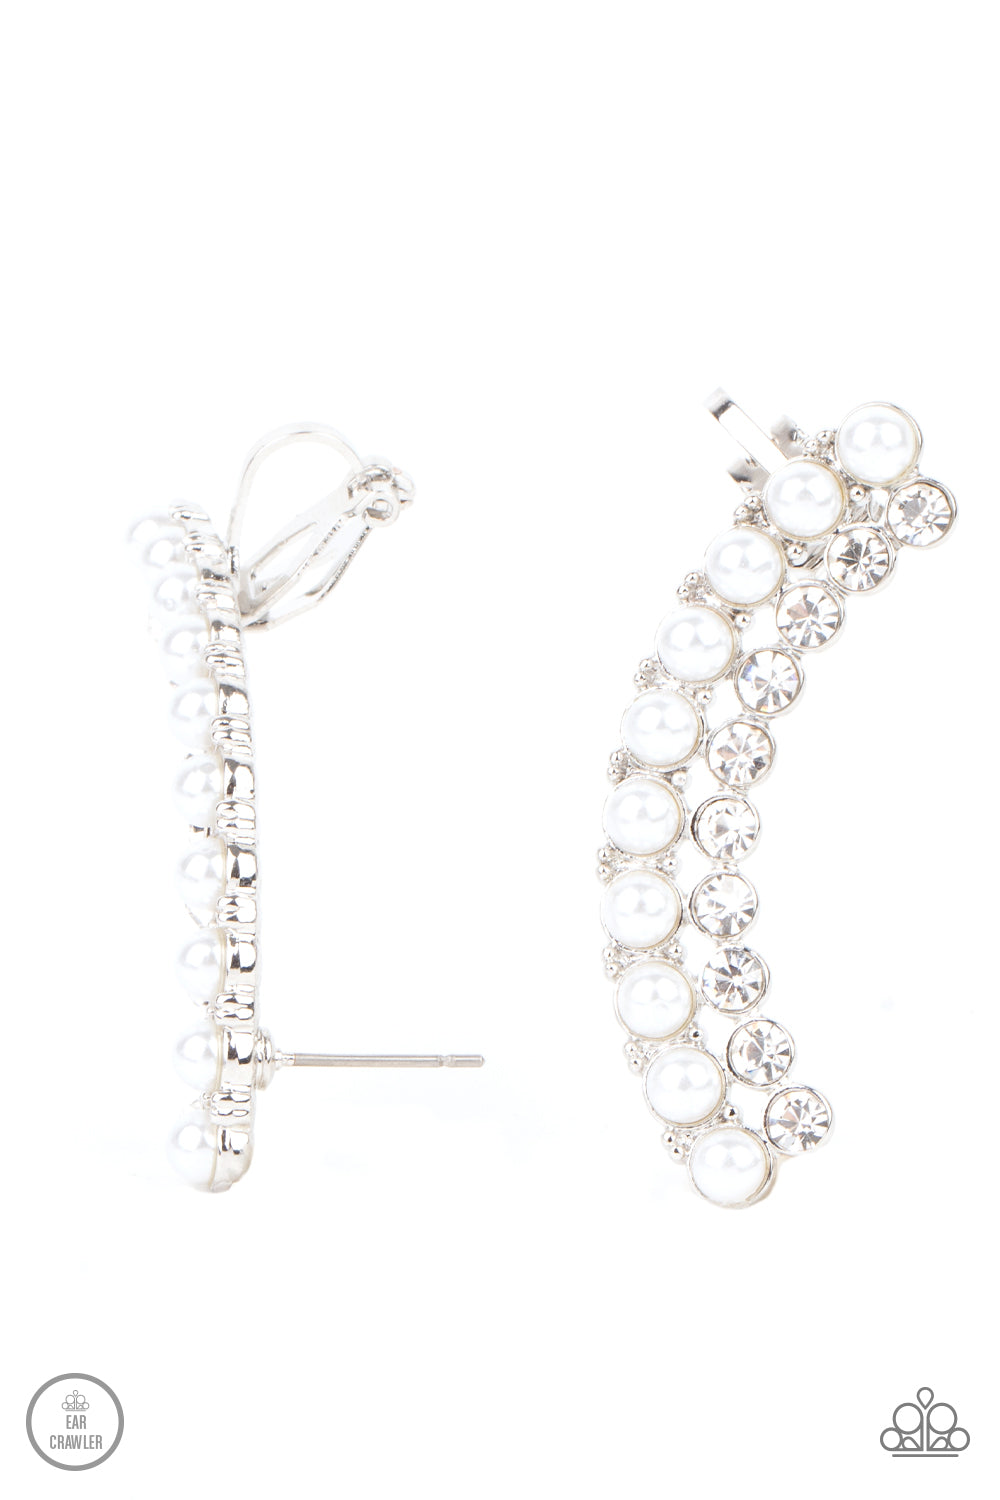 Doubled Down On Dazzle White Ear Crawler - Paparazzi Accessories  Featuring classic silver fittings, two rows of dainty white pearls and glassy white rhinestones arch into a timeless statement piece. Earring attaches to a standard post earring. Features a clip-on fitting at the top for a secure fit.  All Paparazzi Accessories are lead free and nickel free!  Sold as one pair of ear crawlers.